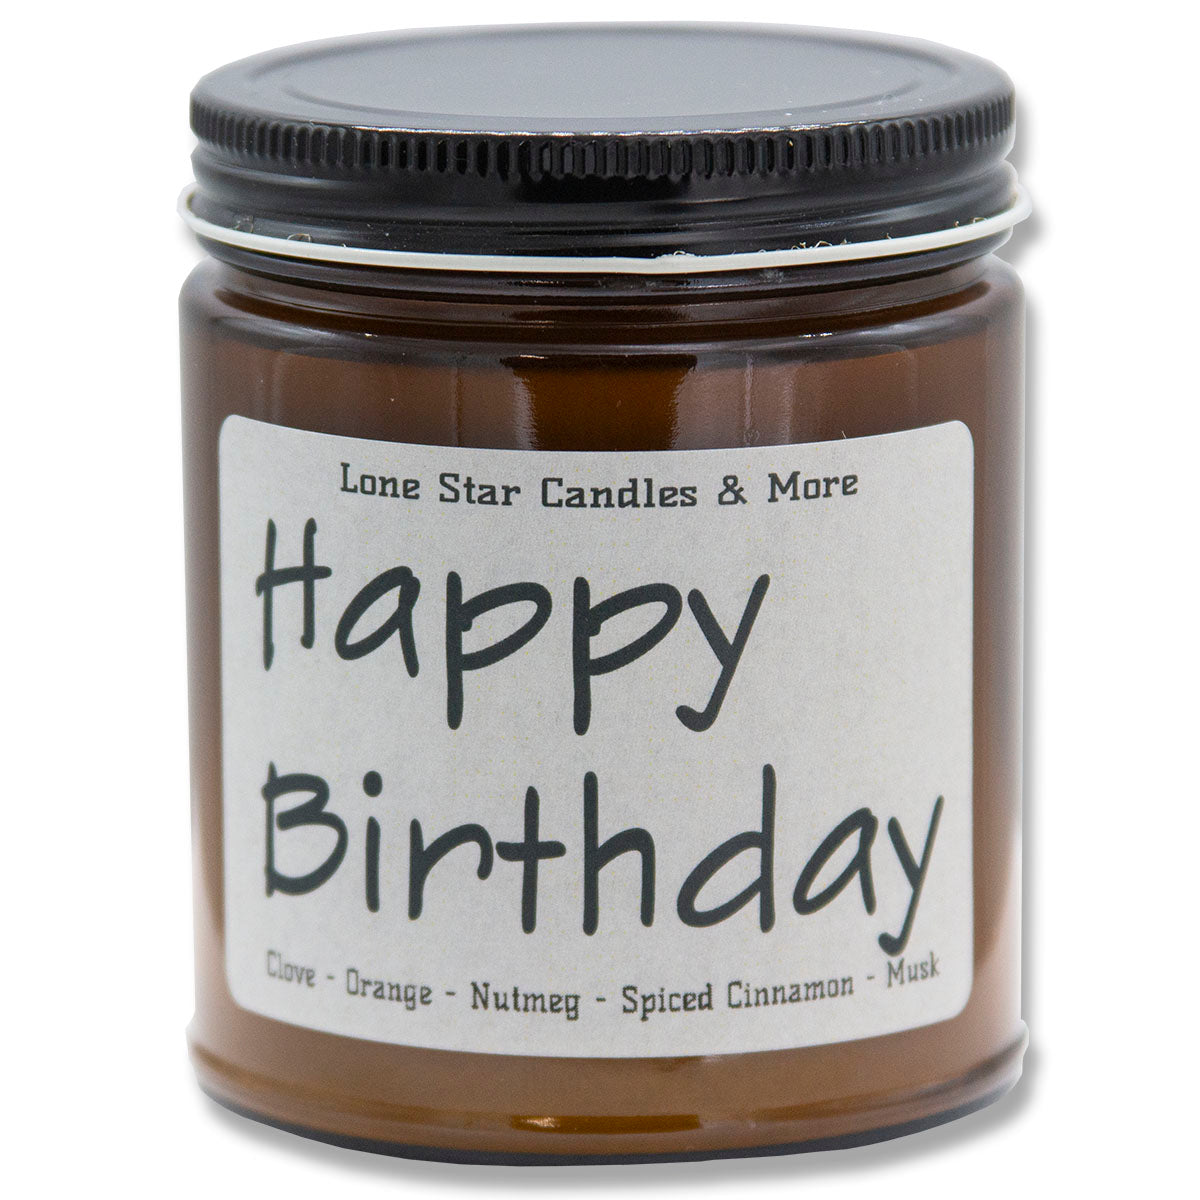 Autumn Cider, Lone Star Candles & More's Premium Hand Poured Strongly Scented Soy Wax Gift Candle, Fall Spices, Sweet Musk, & A Hint of Pineapple, US Made in Texas, Amber Glass Jar 9oz Happy Birthday